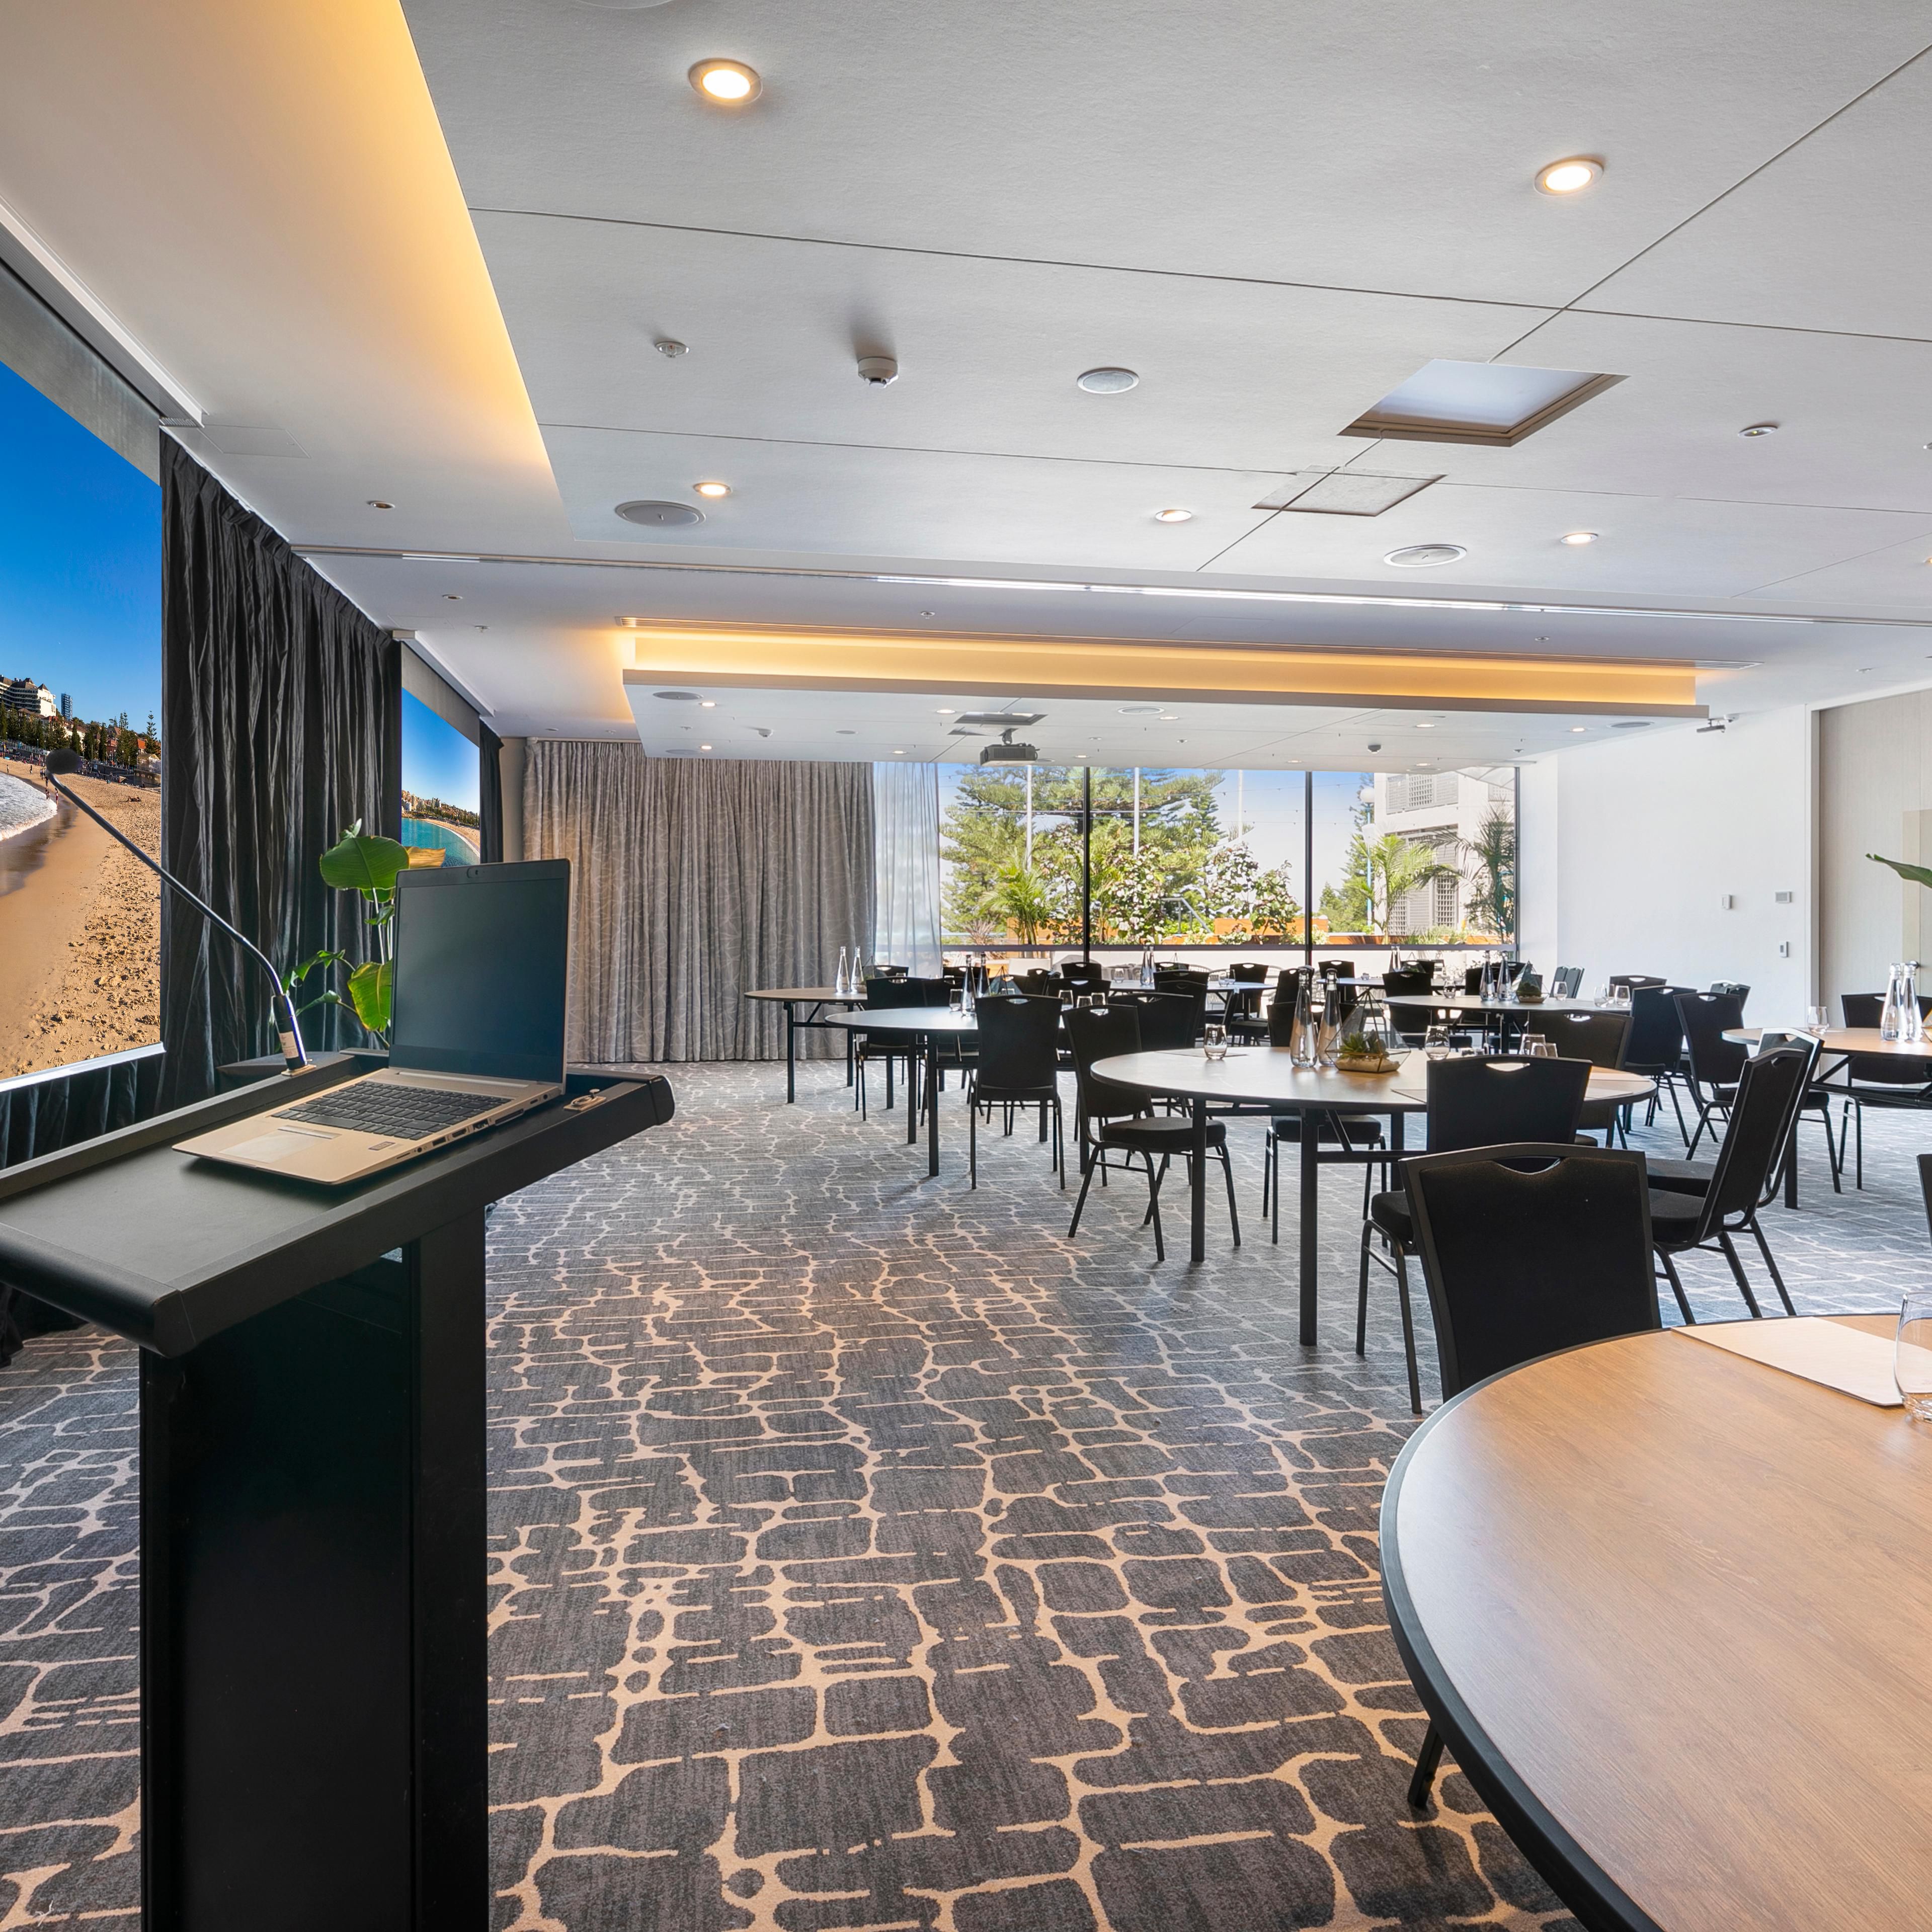 Centennial Meeting Room for Corporate &amp; Social Events